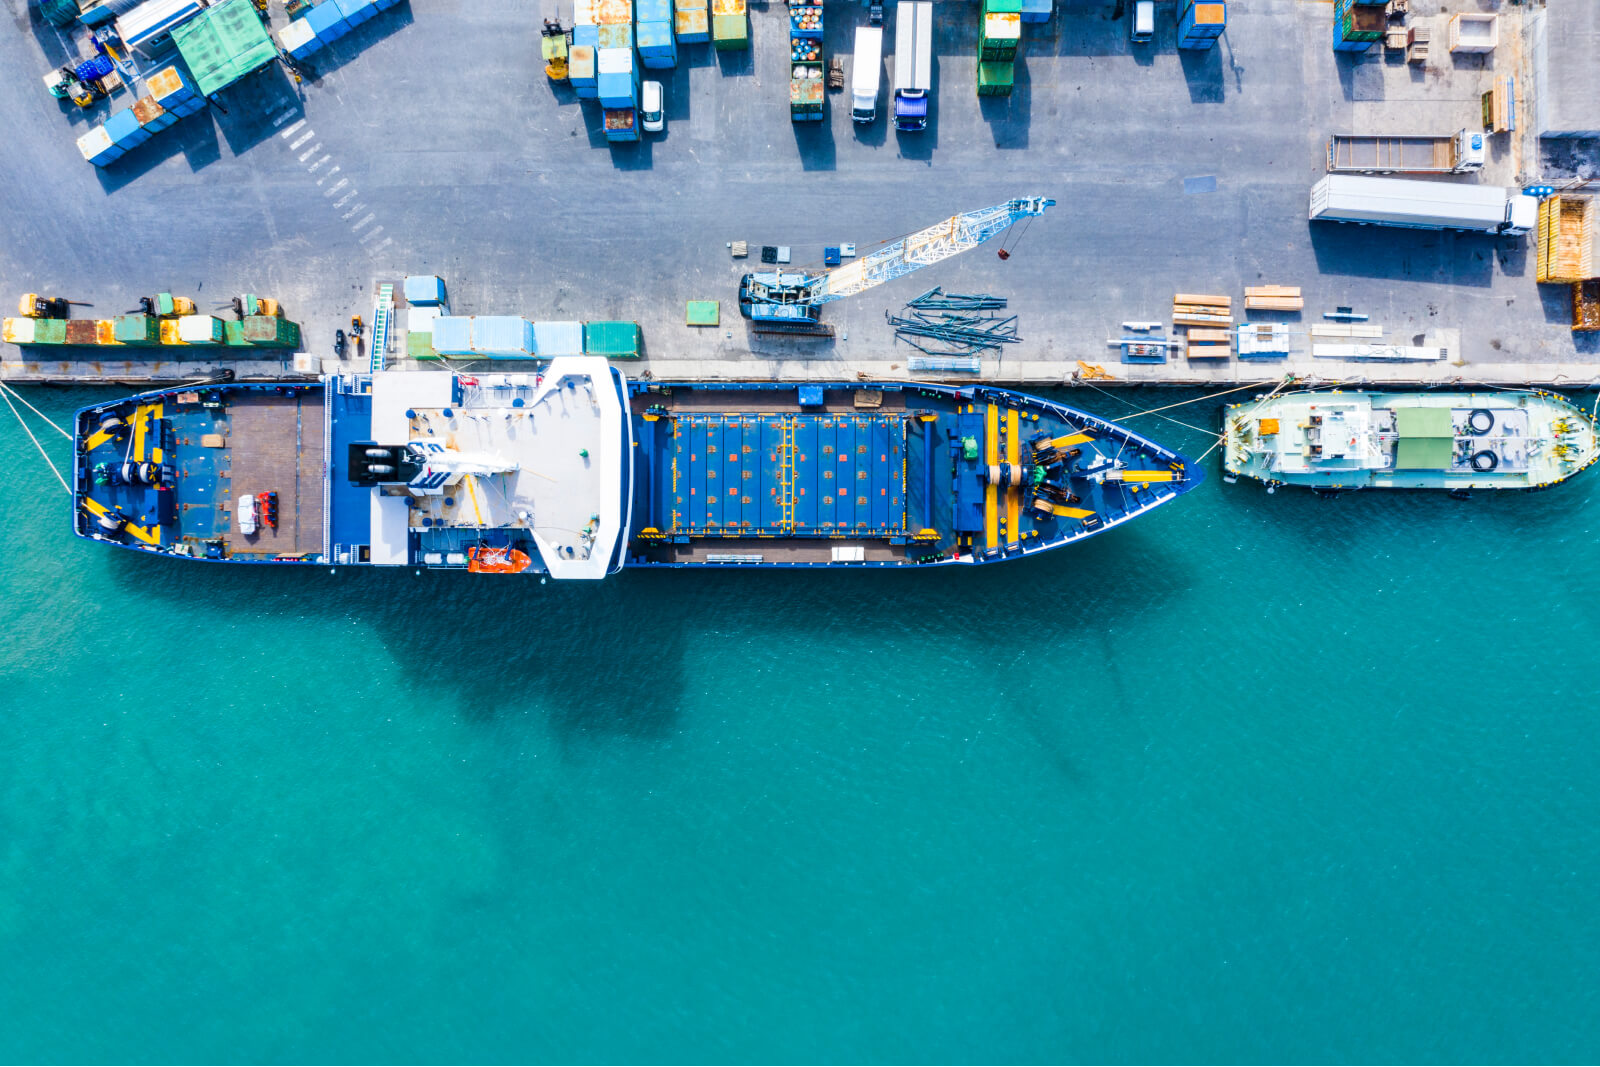 Overhead view of a container ship in port